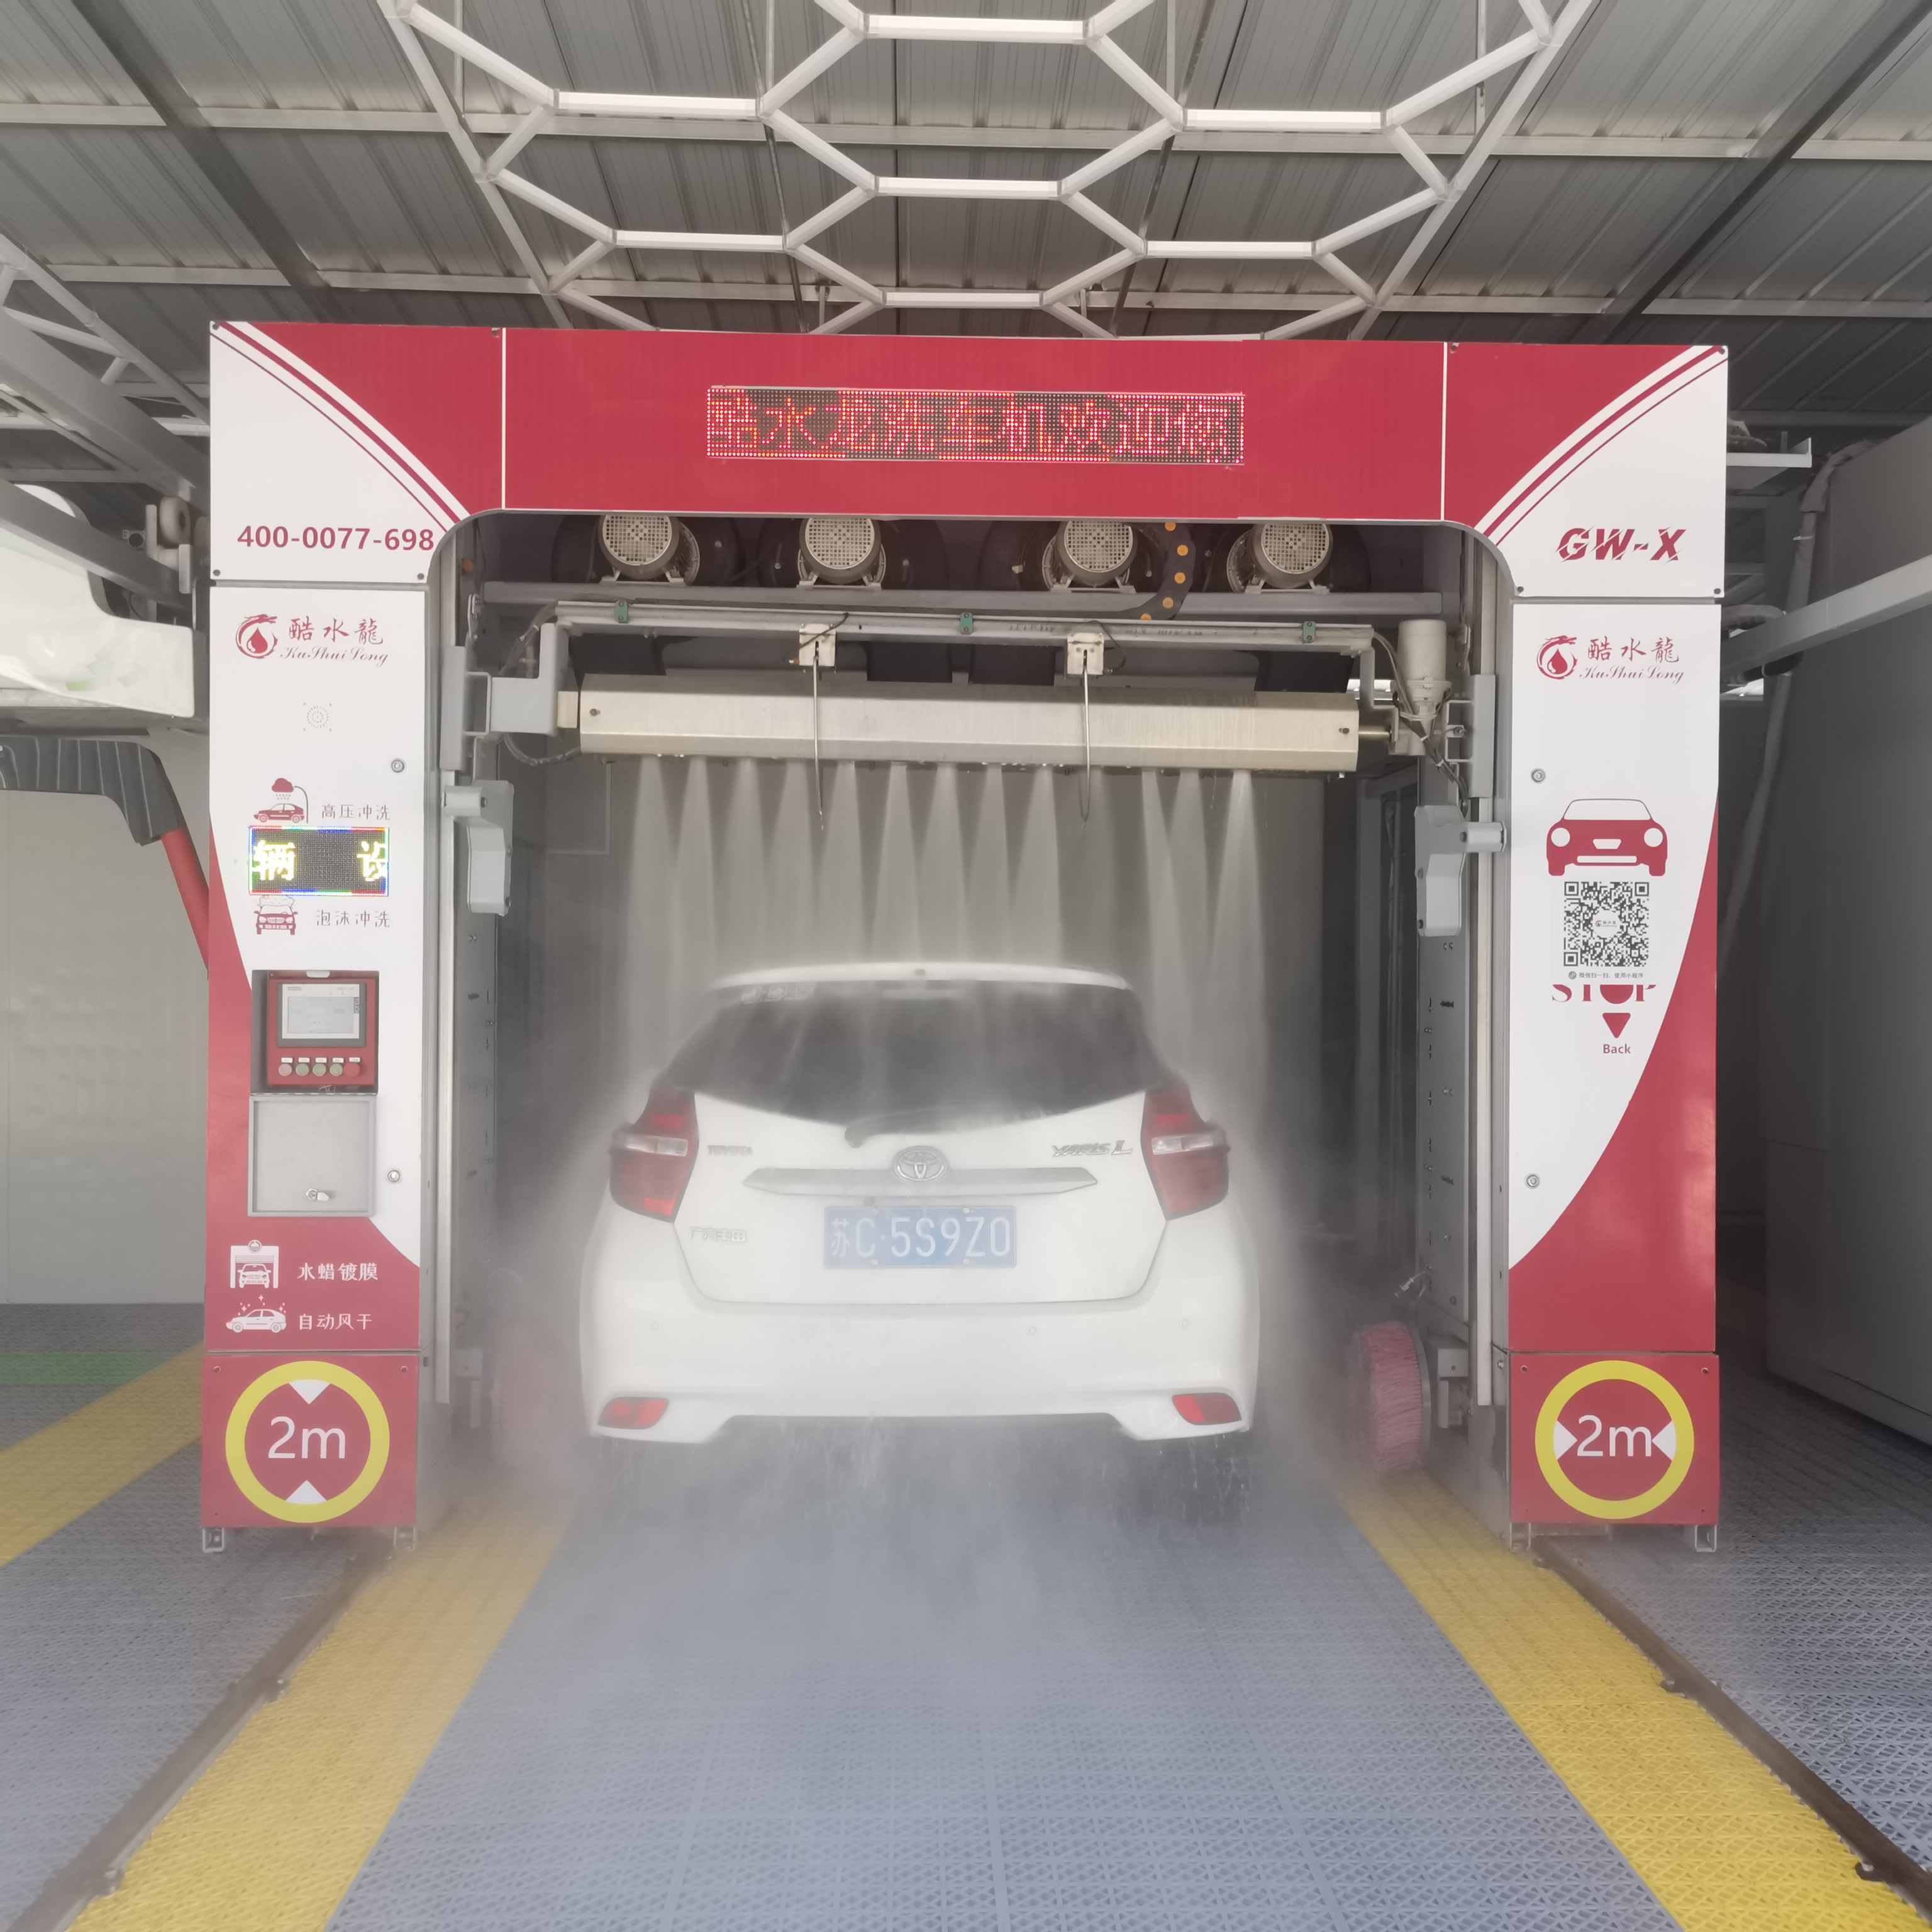 24-hour unmanned self-service car washing machine